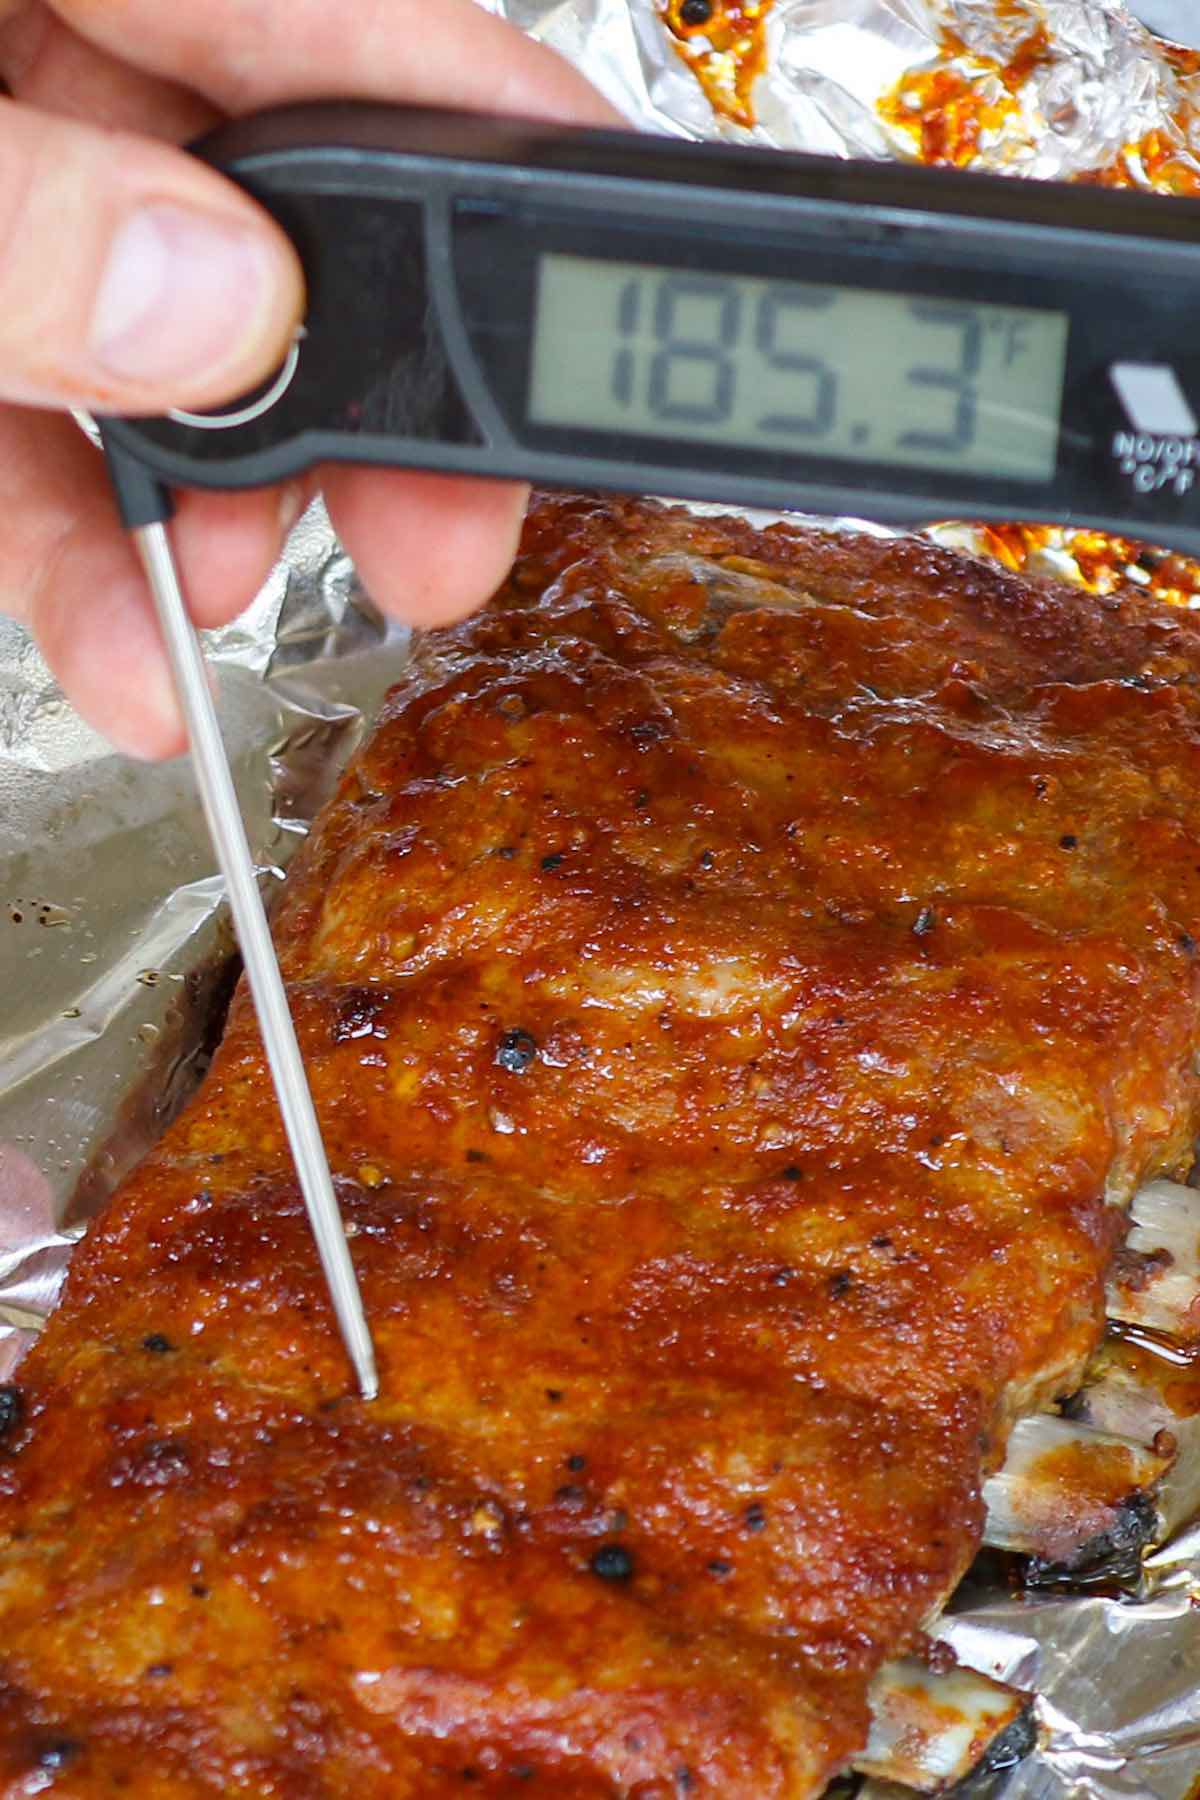 Checking the internal temperature of ribs and getting a reading of 185°F showing they are ready